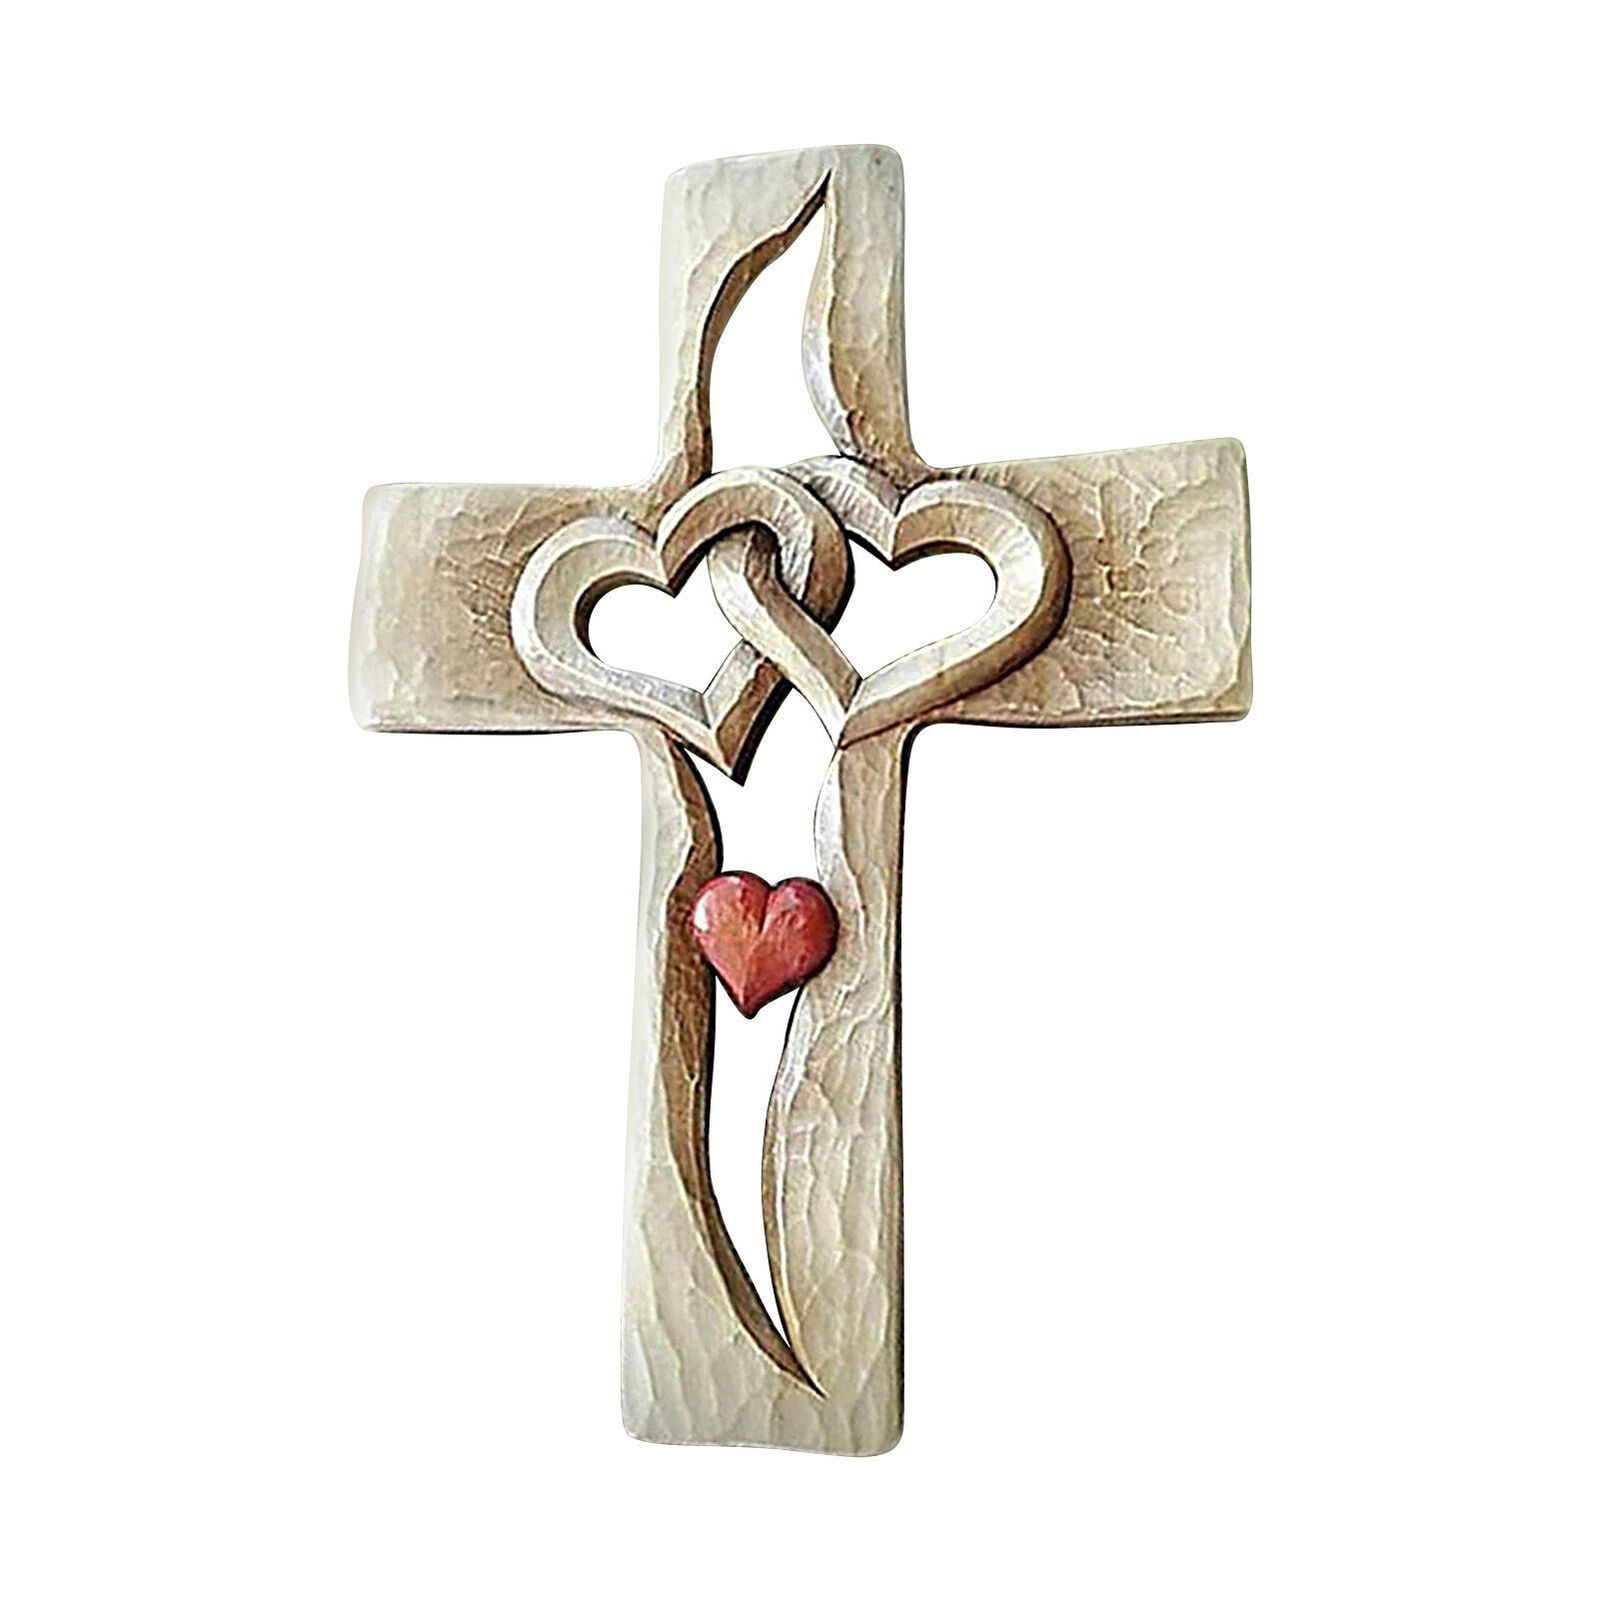 Wooden Entwined Heart Cross Intertwined Hearts Wall Hangings Cross Hand Carved